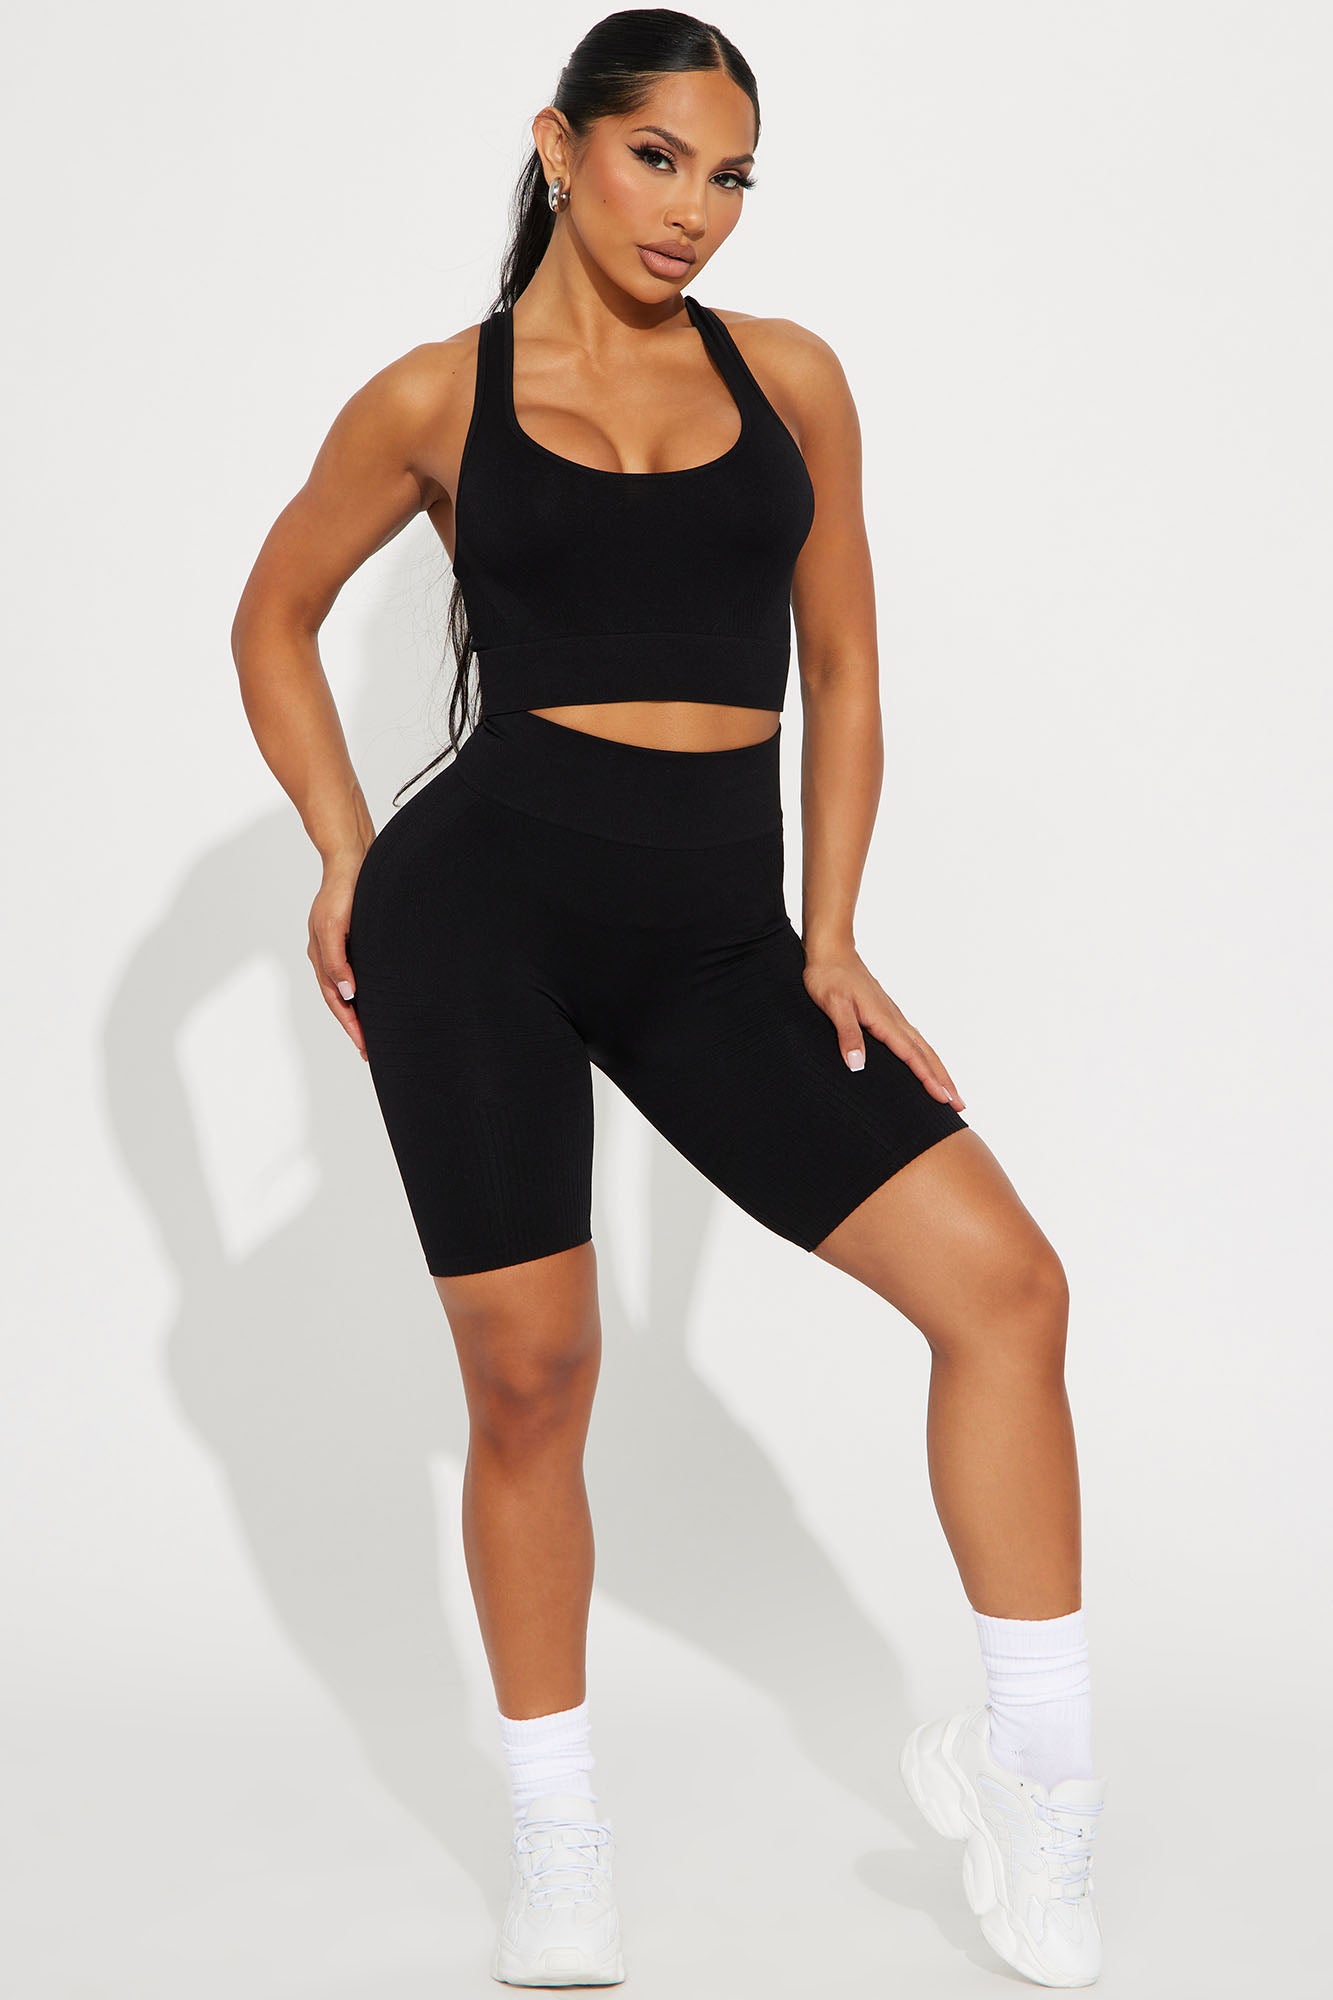 Pin on Women's Sports & Fitness Clothing Colletion